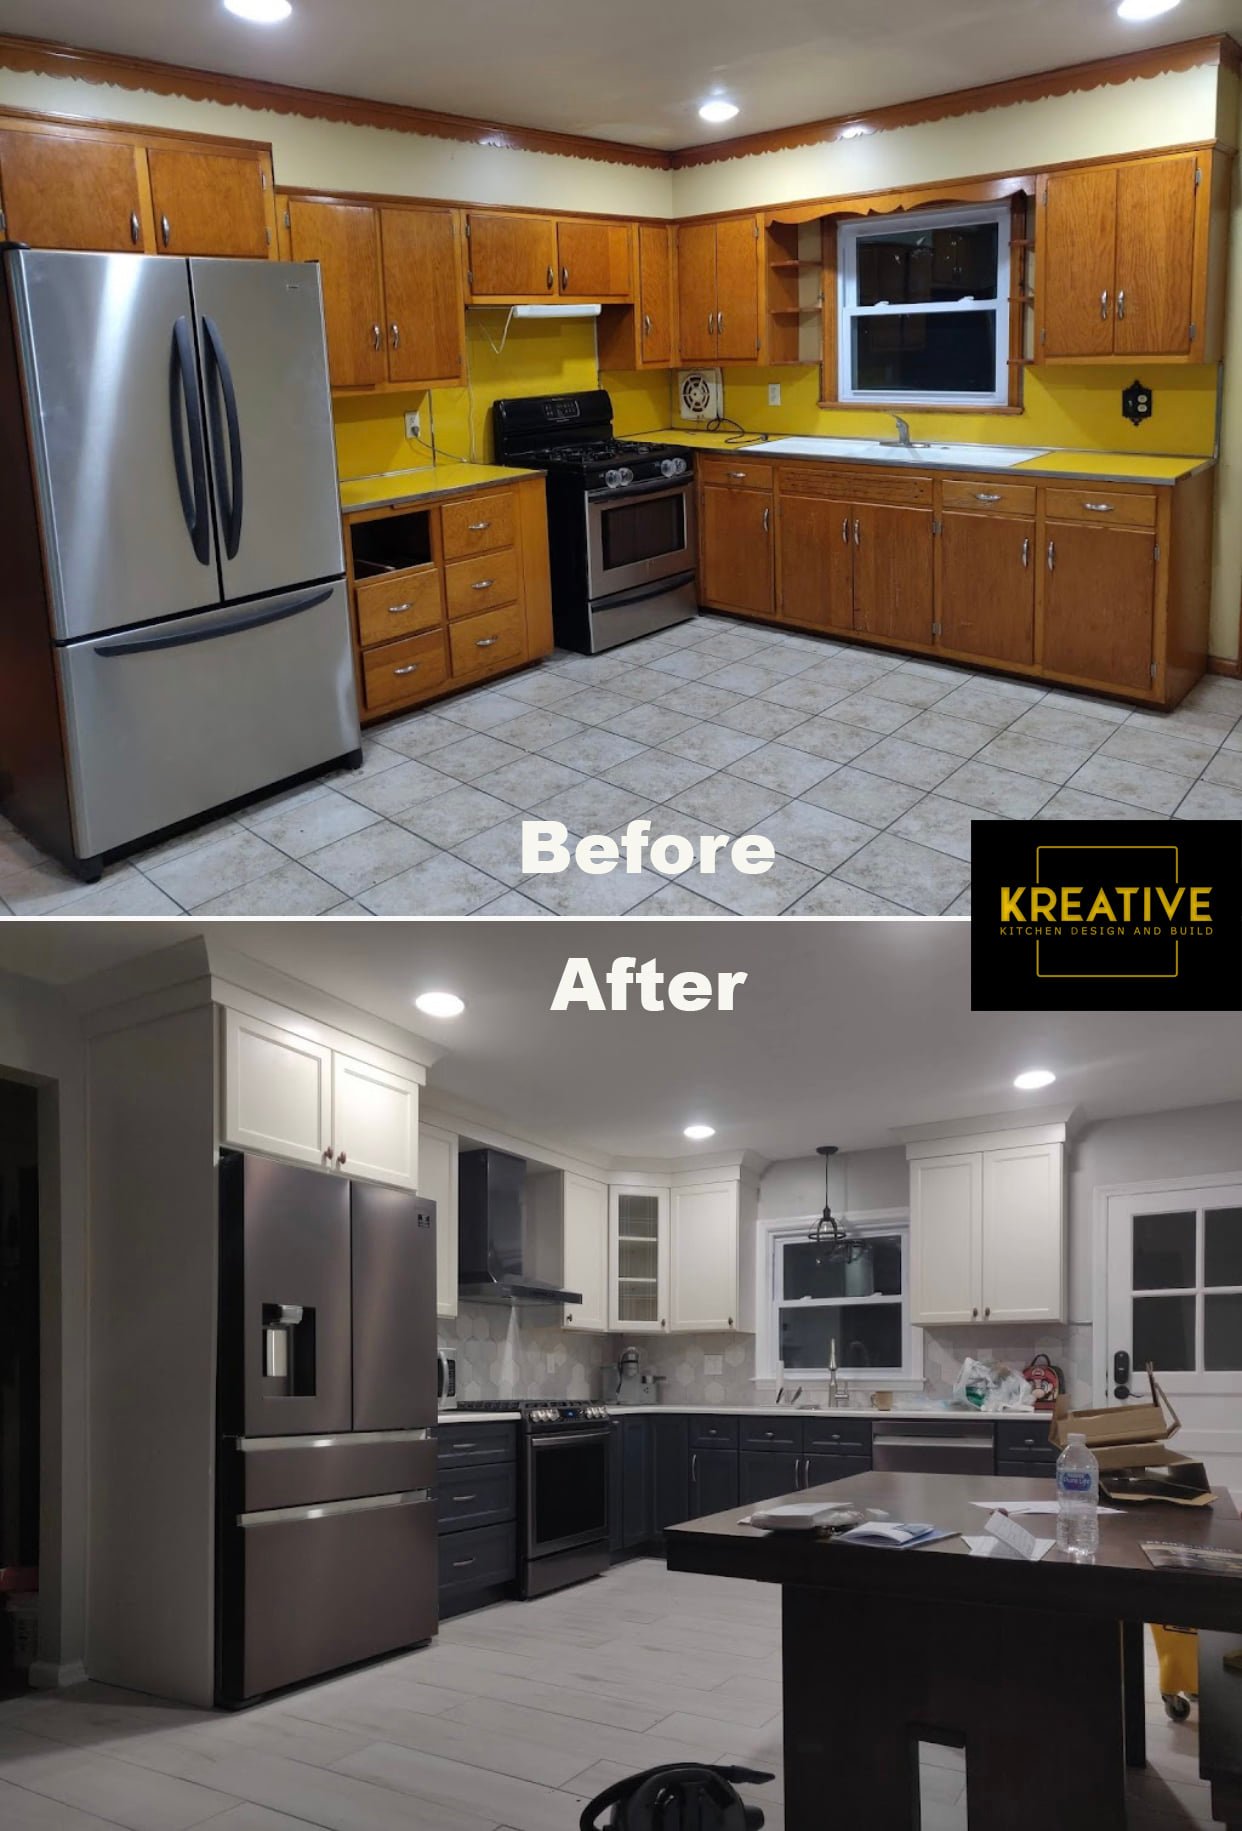 Before & After Gallery | Kitchen Remodel Gallery | Kreative Kitchen